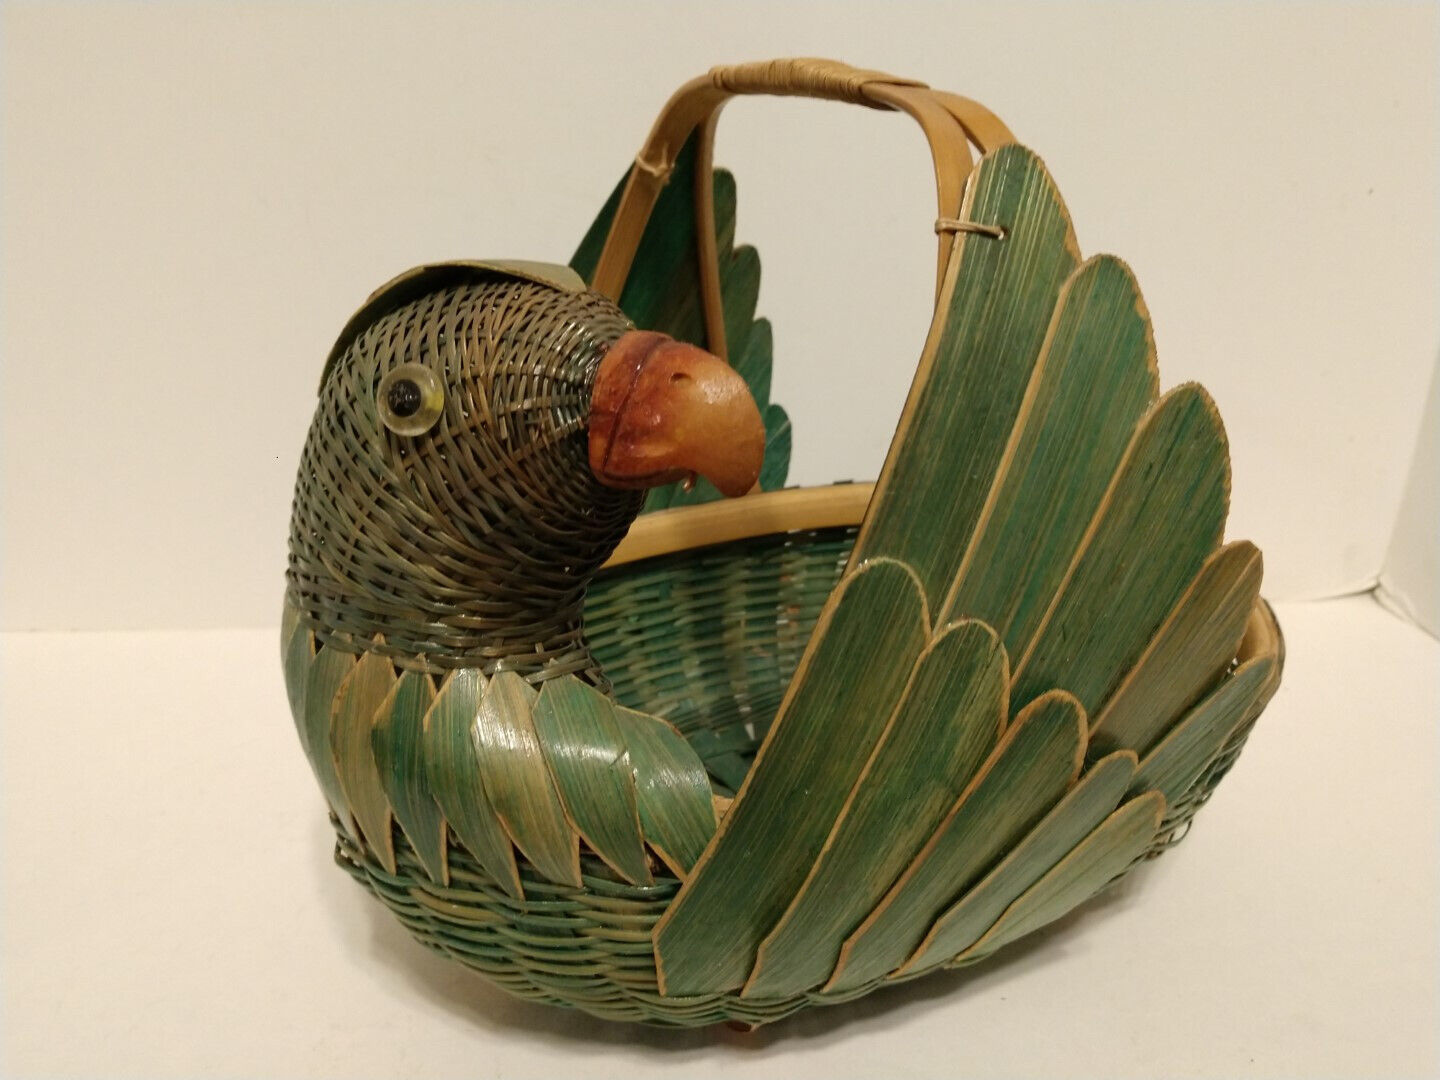 VTG Zhejiang Bamboo PARROT BIRD Green Painted Chinese Basket Hand Crafted Woven